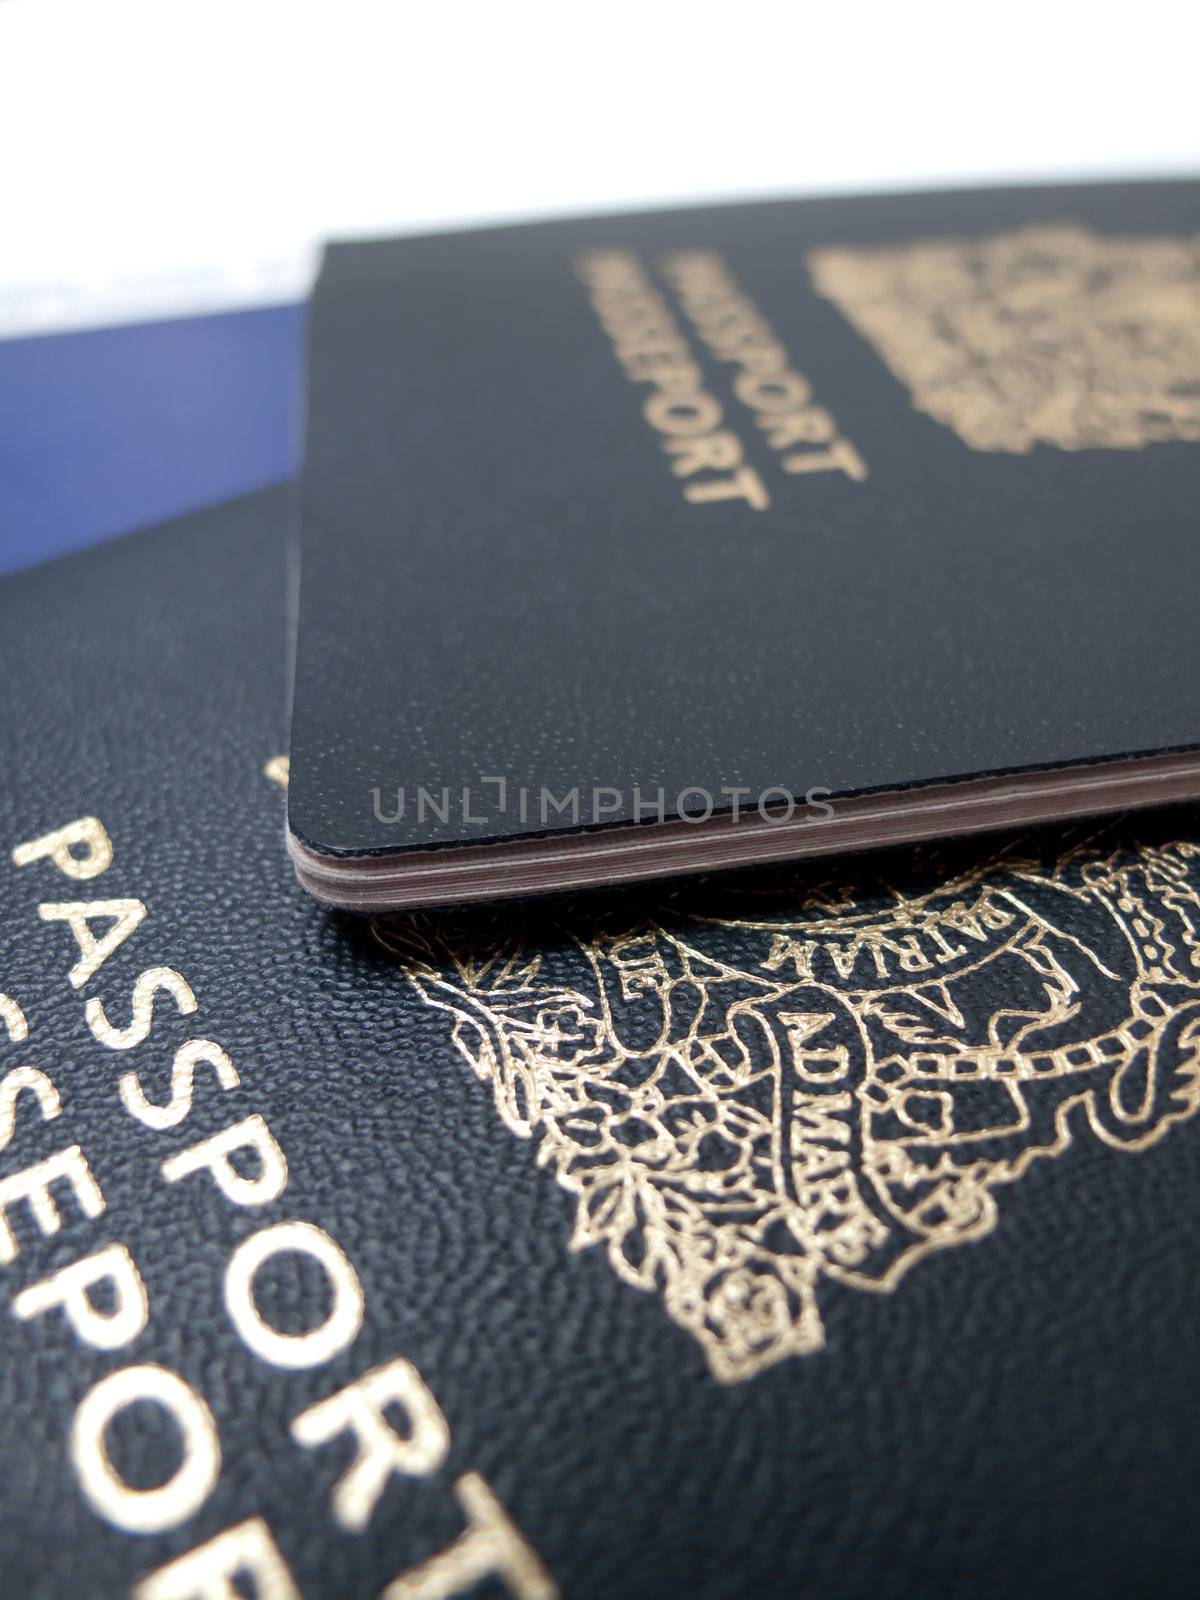 A closeup of two passports, isolated on white.